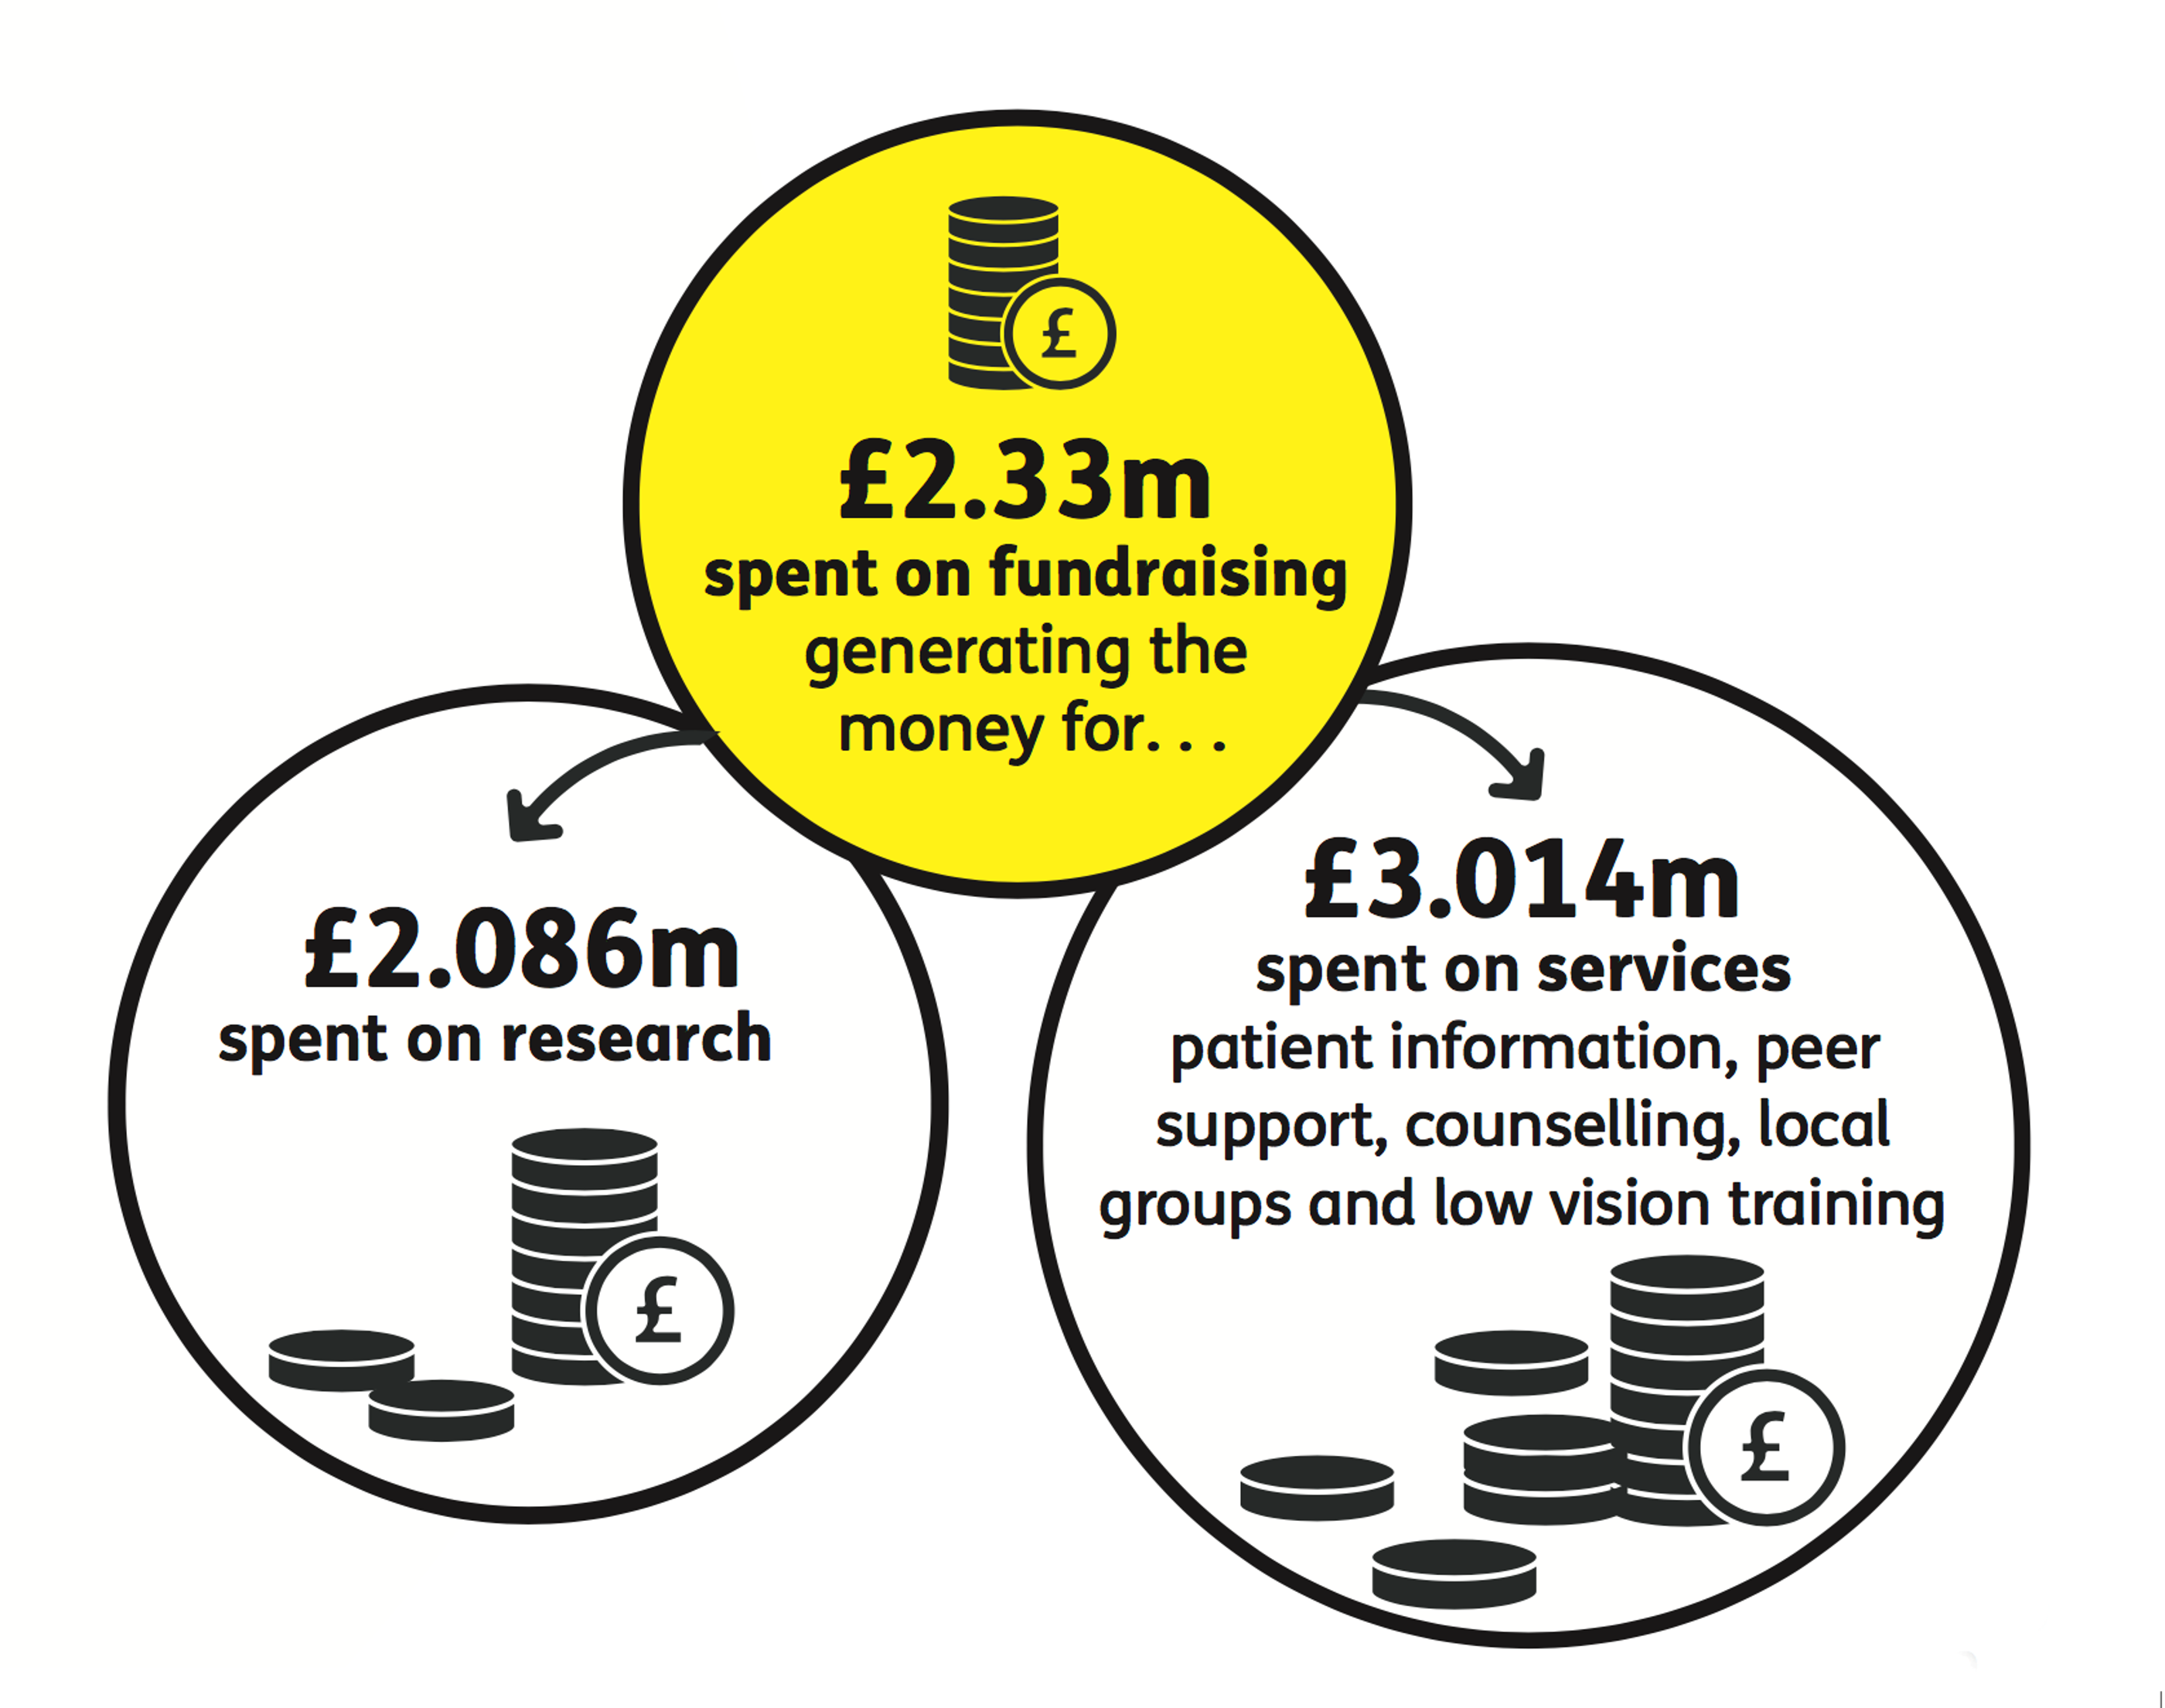 Spending Graphic 2022 - 2.33m spent on fundraising, 2m research, 3m services